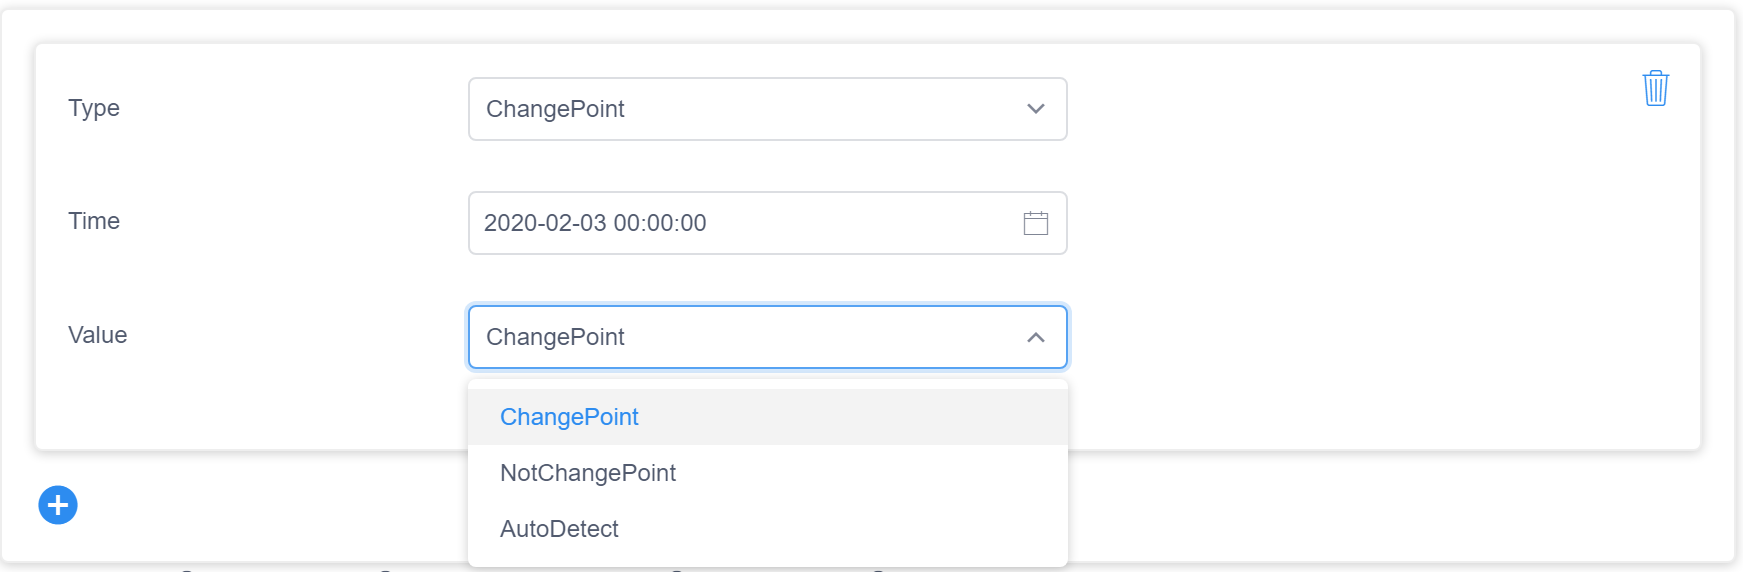 Change point menu with dropdown containing options for ChangePoint, NotChangePoint, and AutoDetect